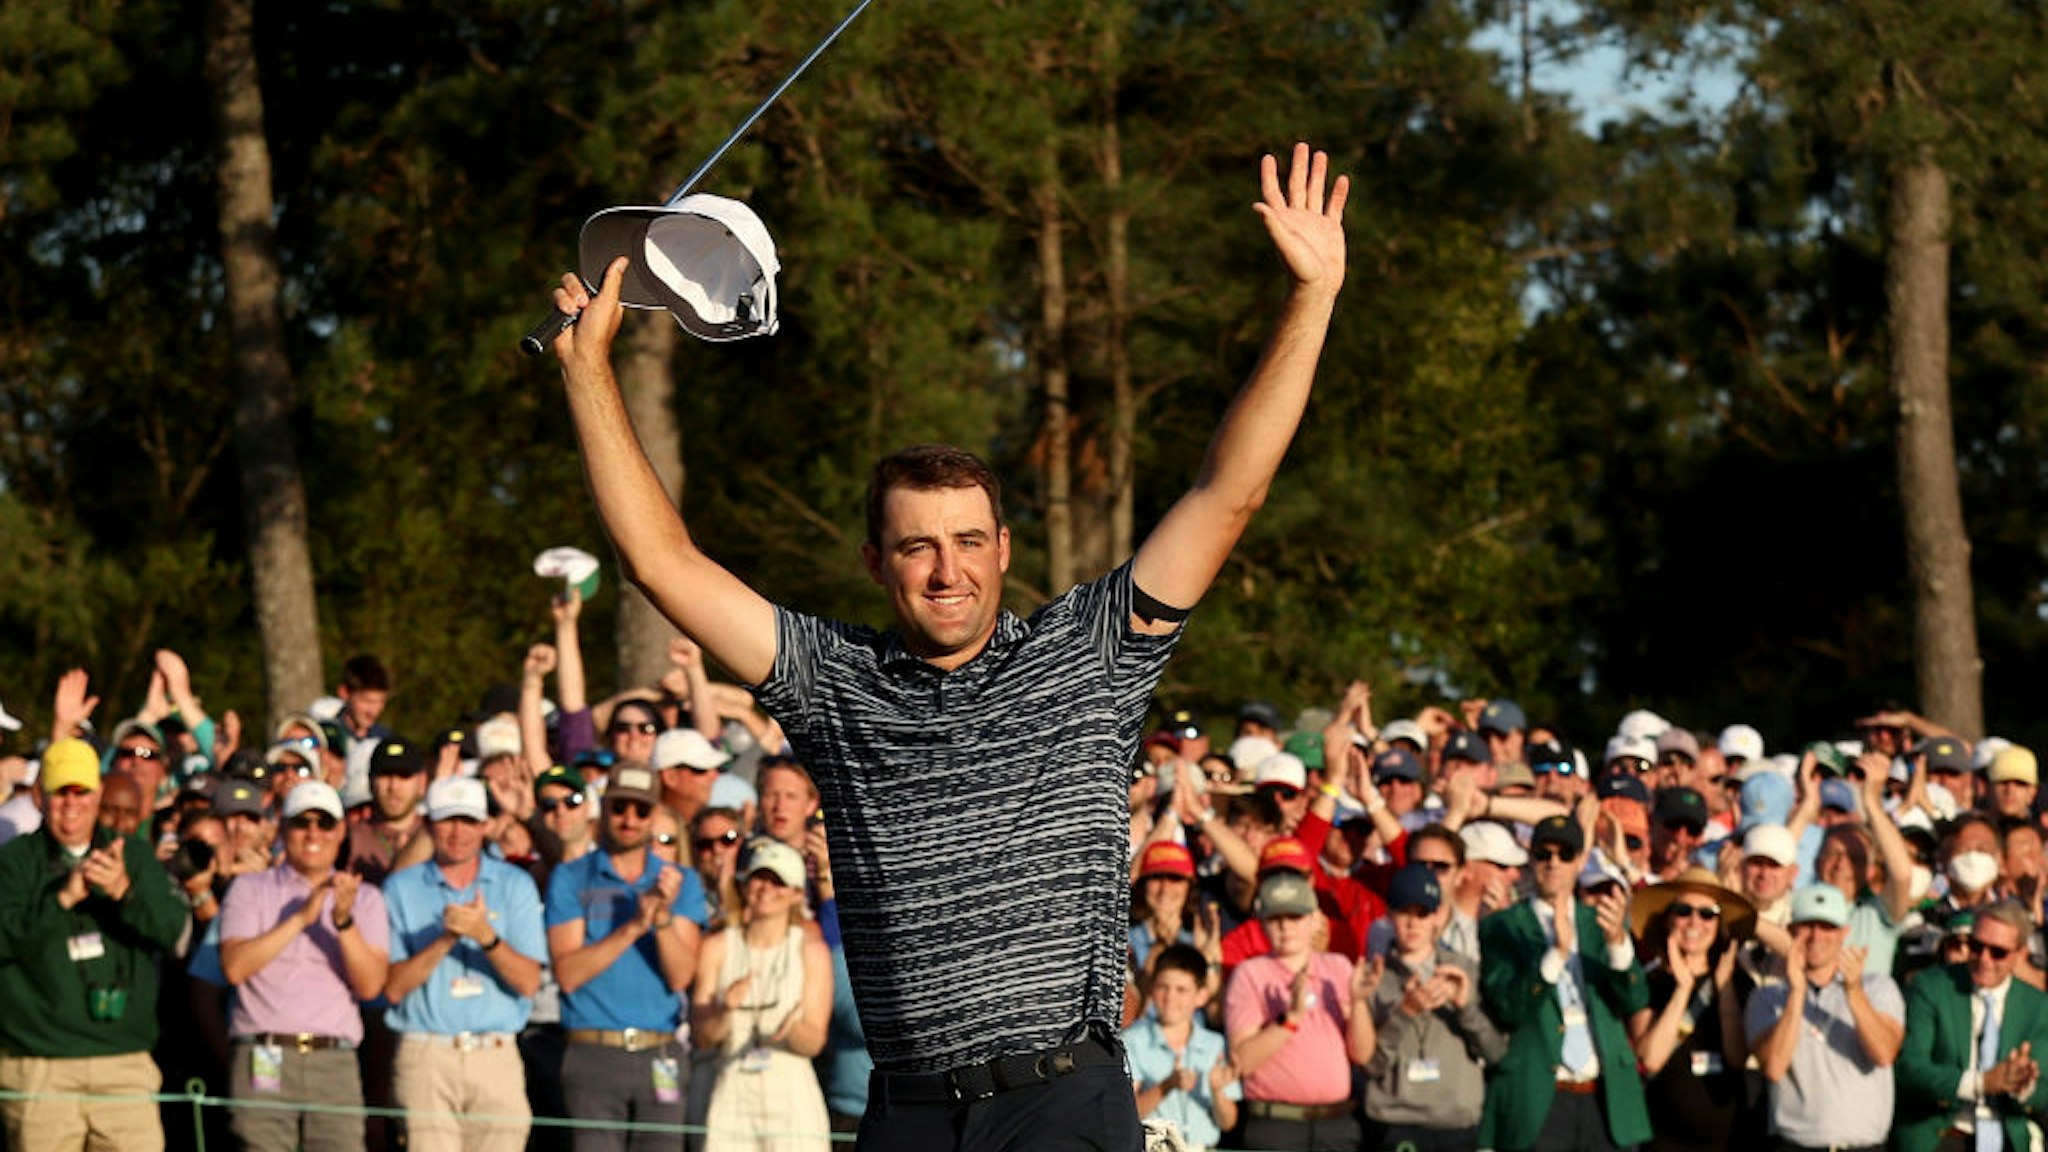 AUGUSTA, GEORGIA - APRIL 10: Scottie Scheffler of the United States celebrates on the 18th green after winning during the final round of the Masters at Augusta National Golf Club on April 10, 2022 in Augusta, Georgia. (Photo by Jamie Squire/Getty Images)